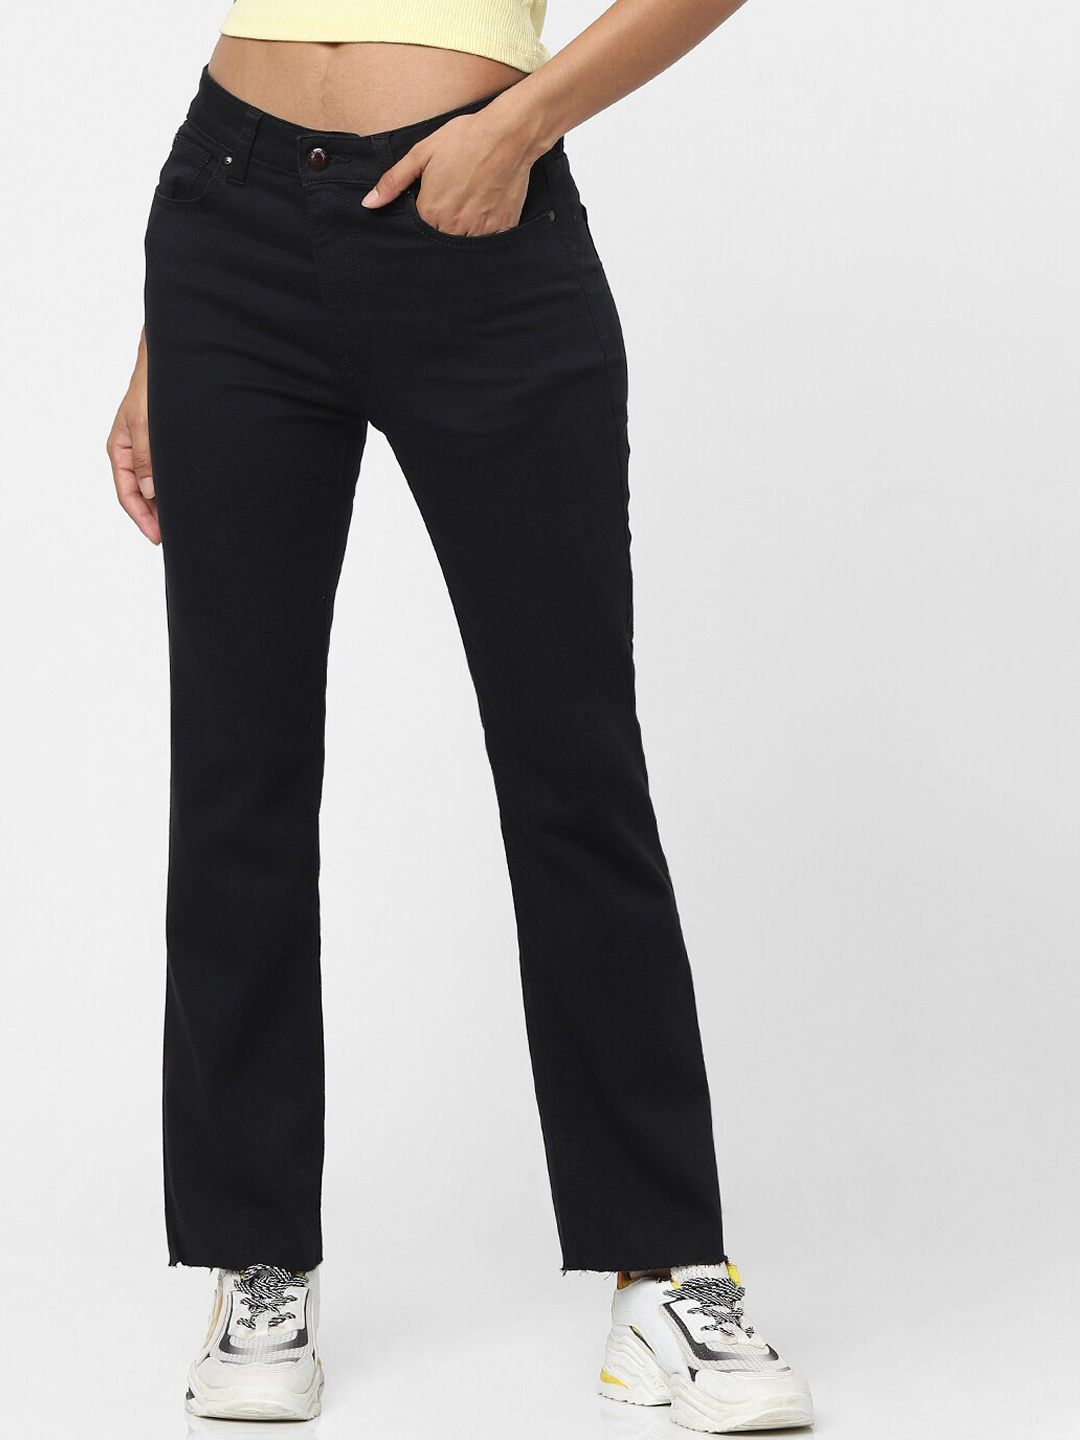 ONLY Women Black Bootcut High-Rise Jeans Price in India